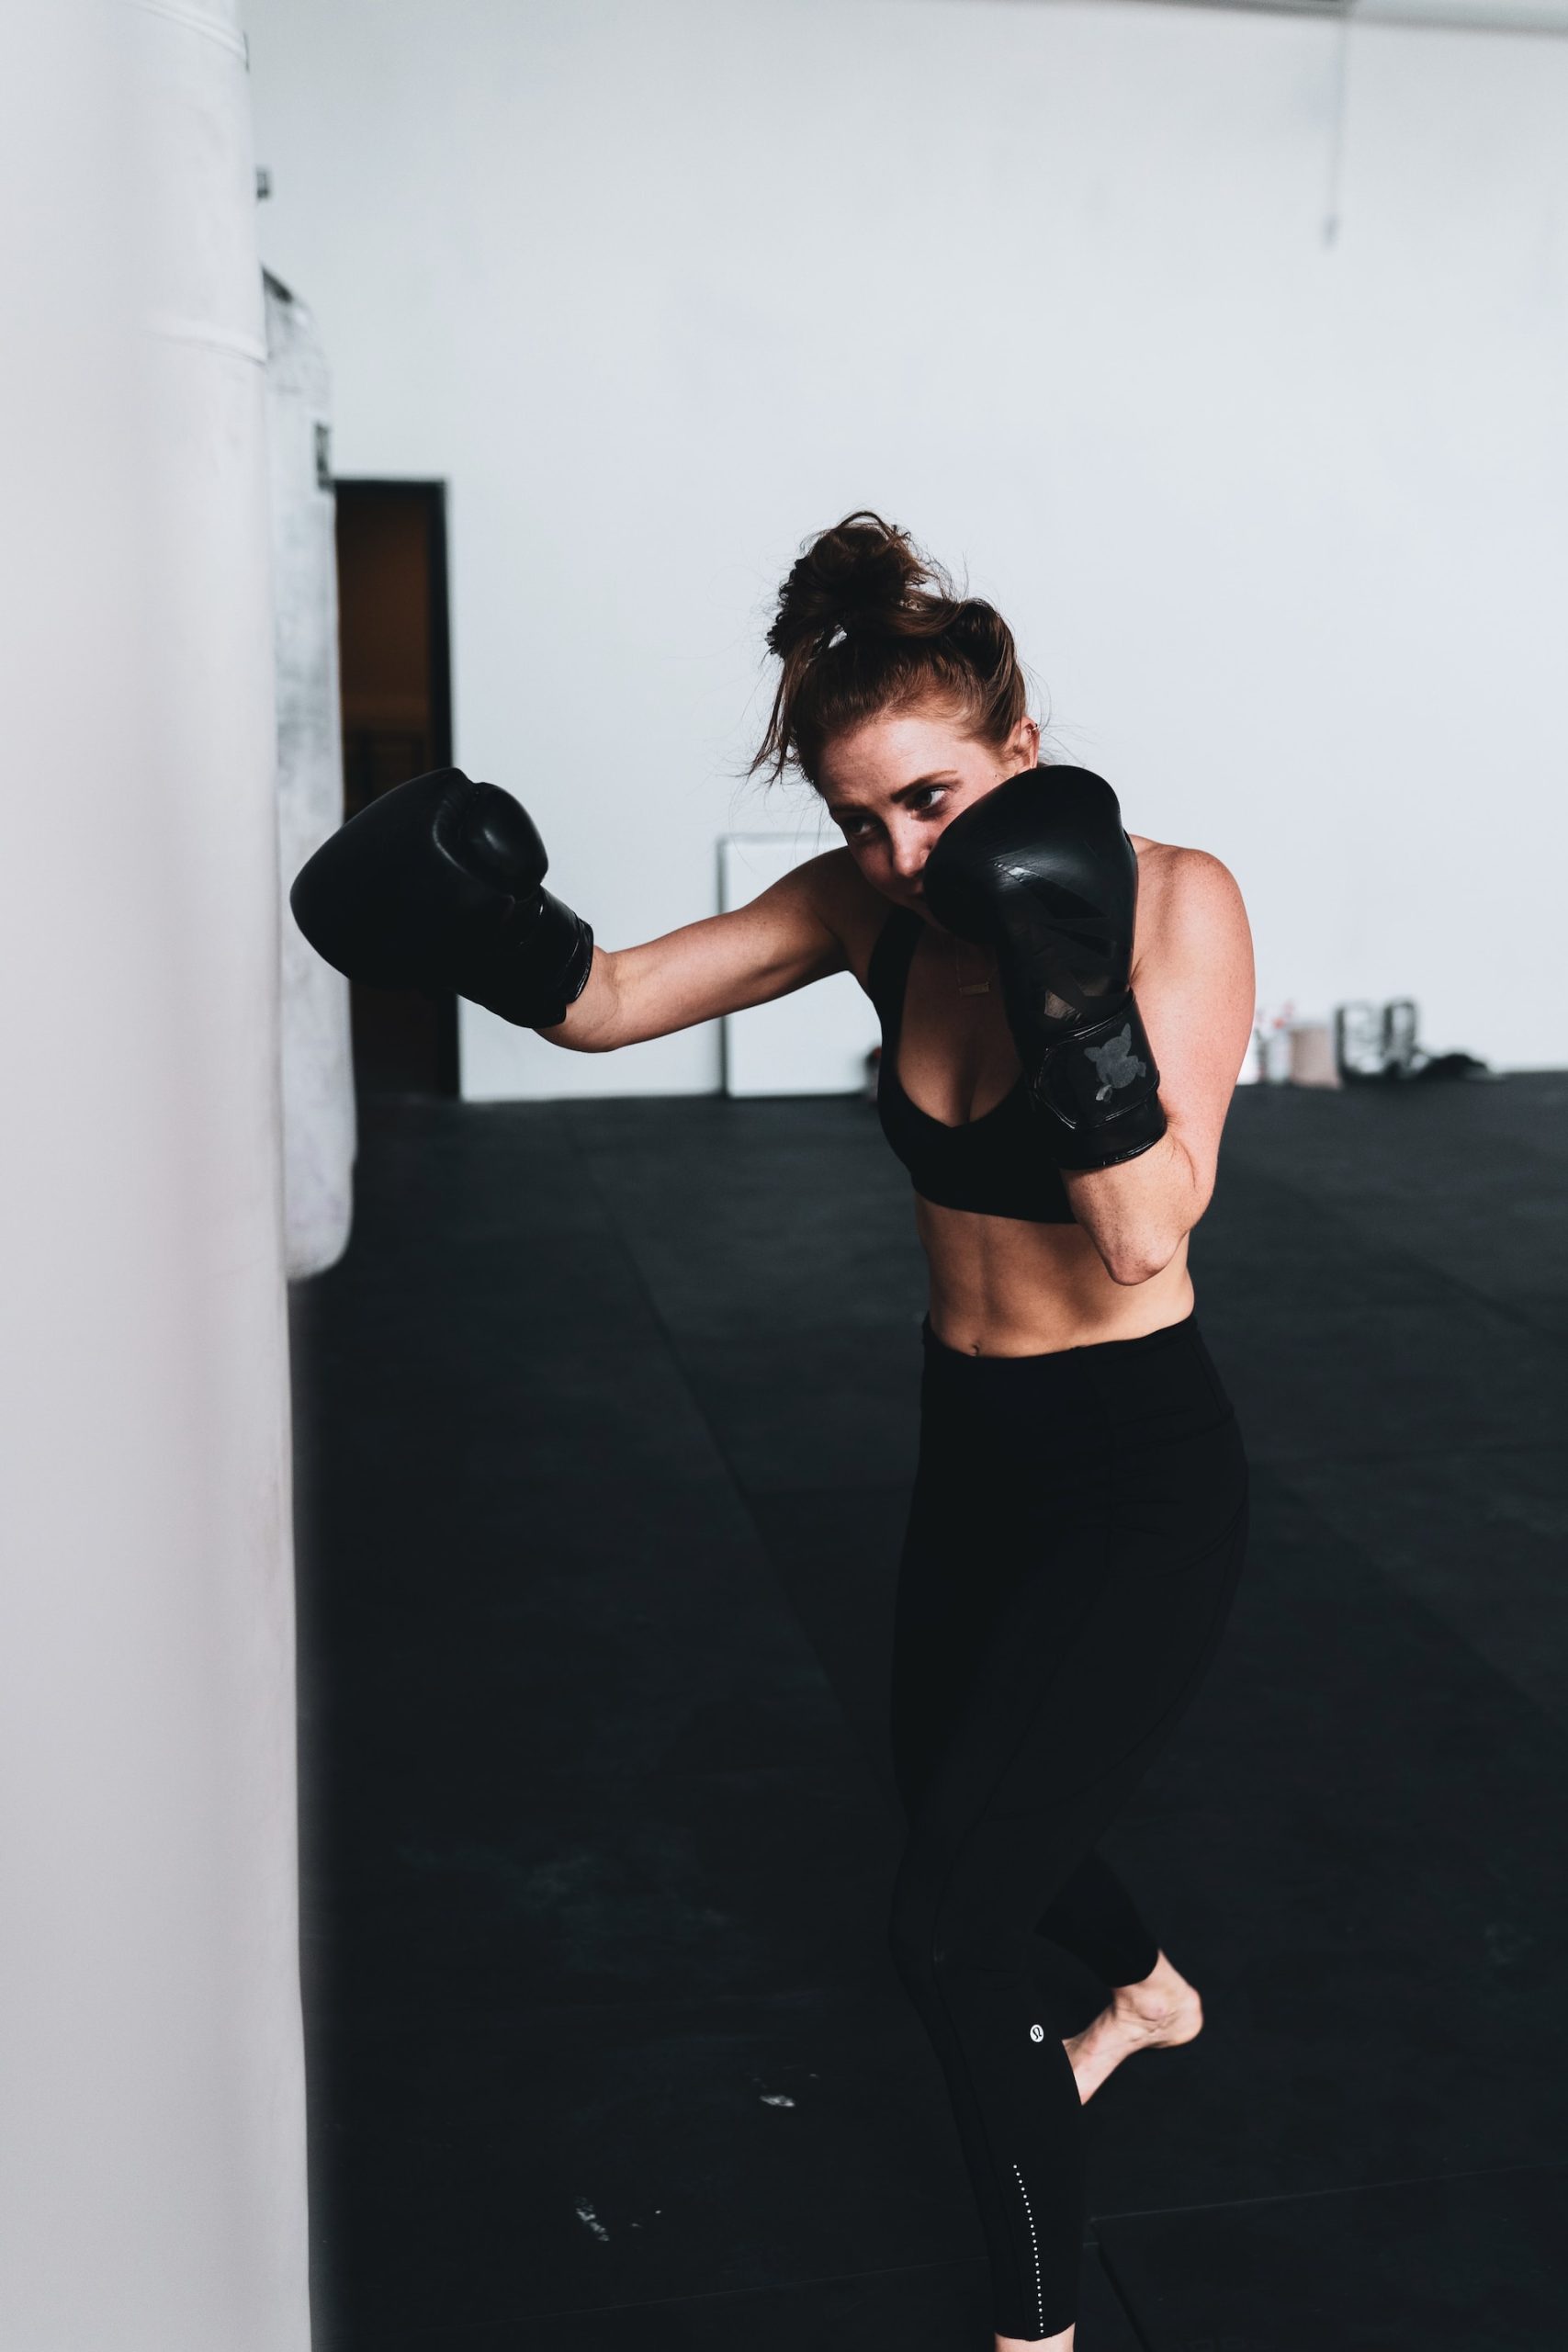 Woman punching a punch bag to strengthen her core abs